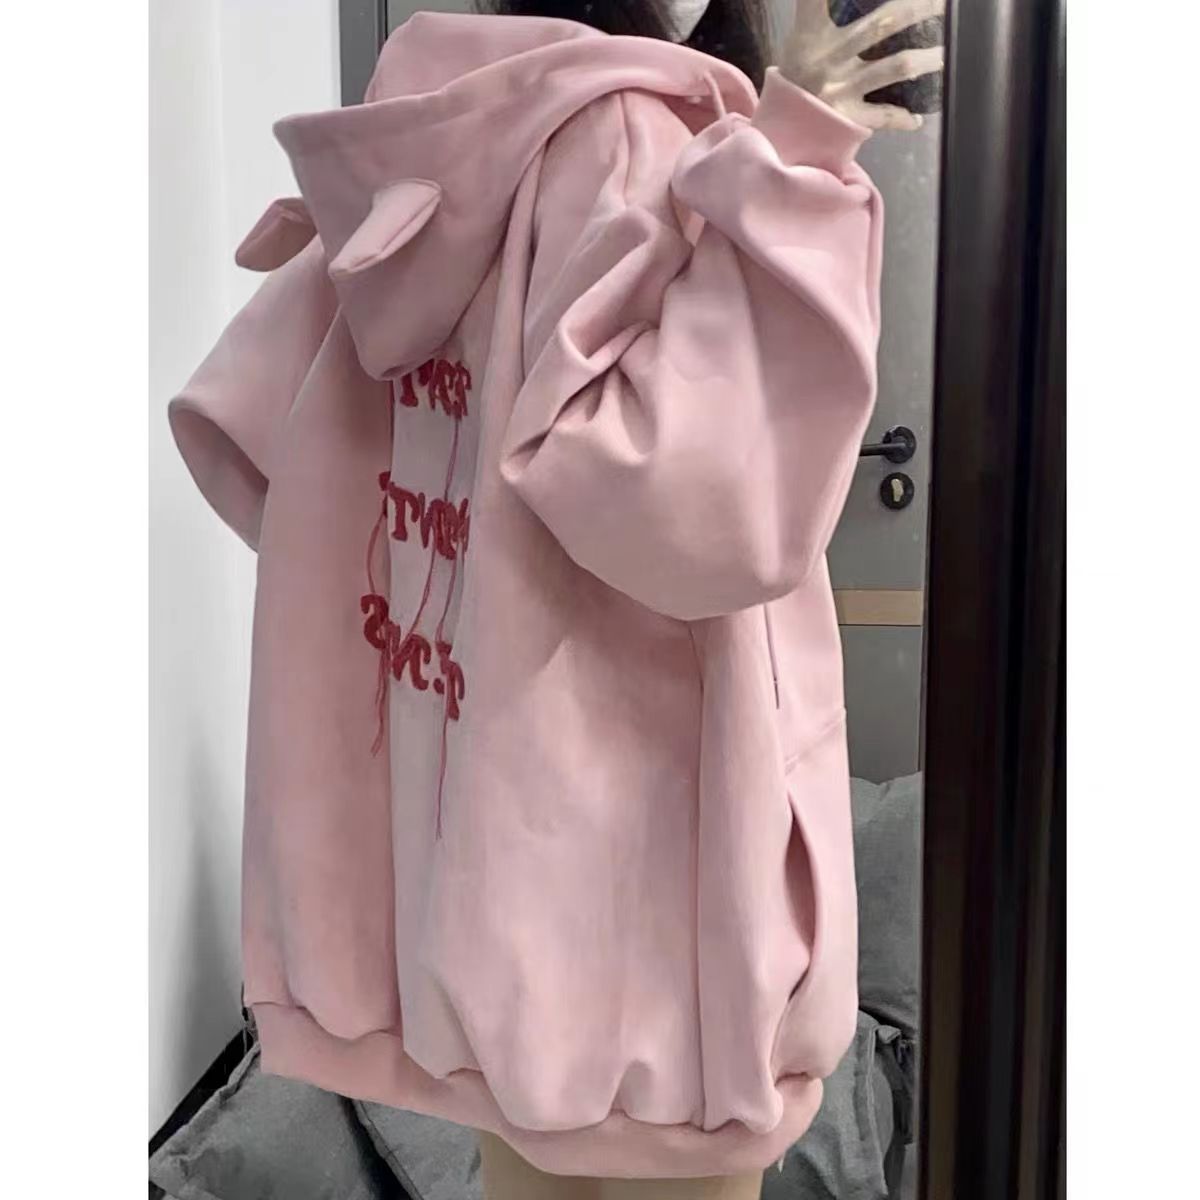 Heavy cotton cute pink little devil horn hooded cardigan sweatshirt for women spring and autumn lazy style zipper jacket